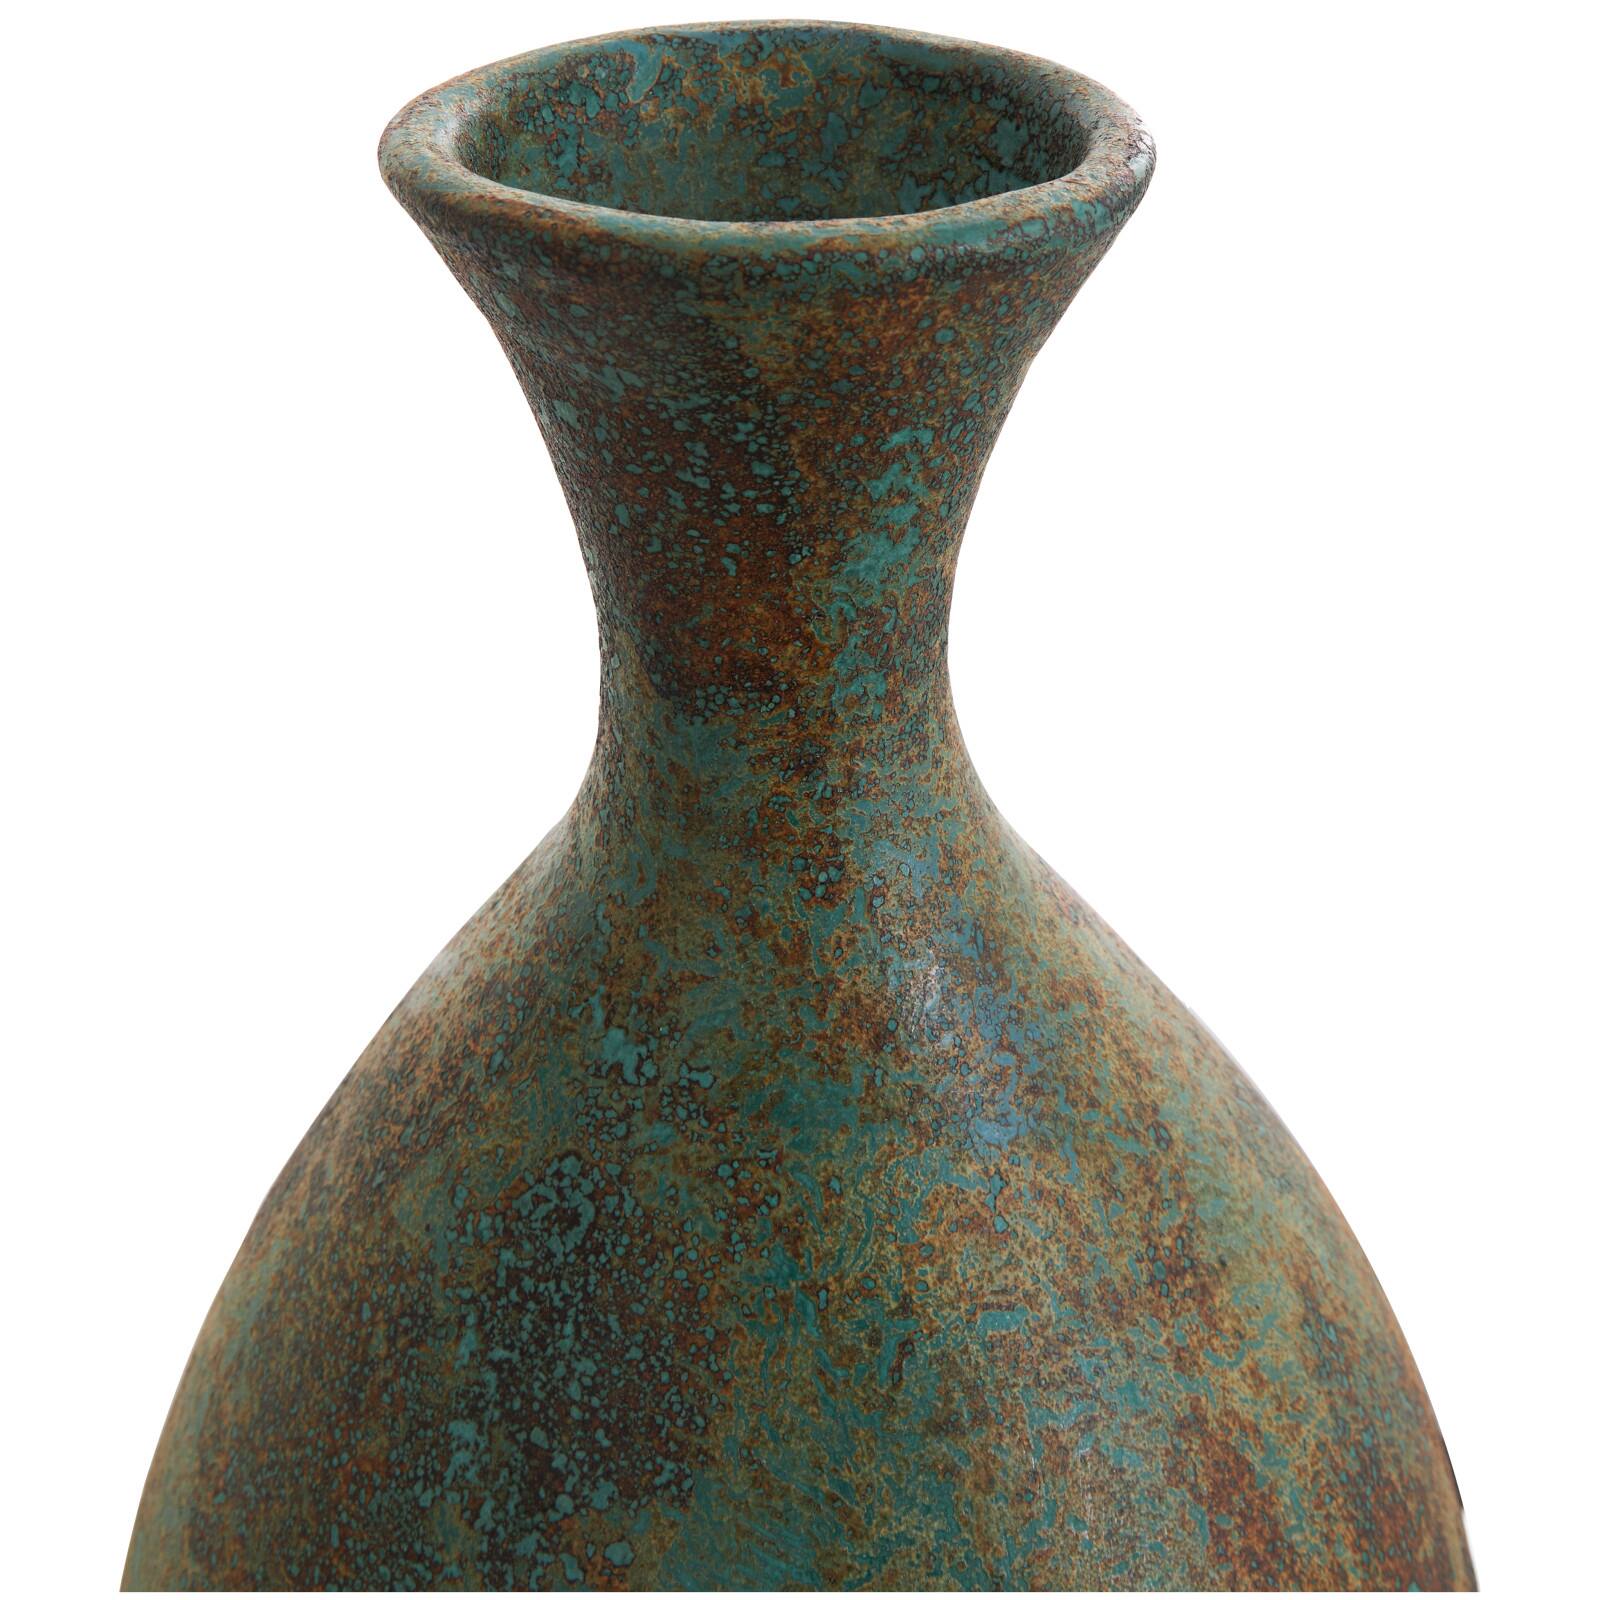 3ft. Green Ceramic Tall Distressed Antique Style Vase